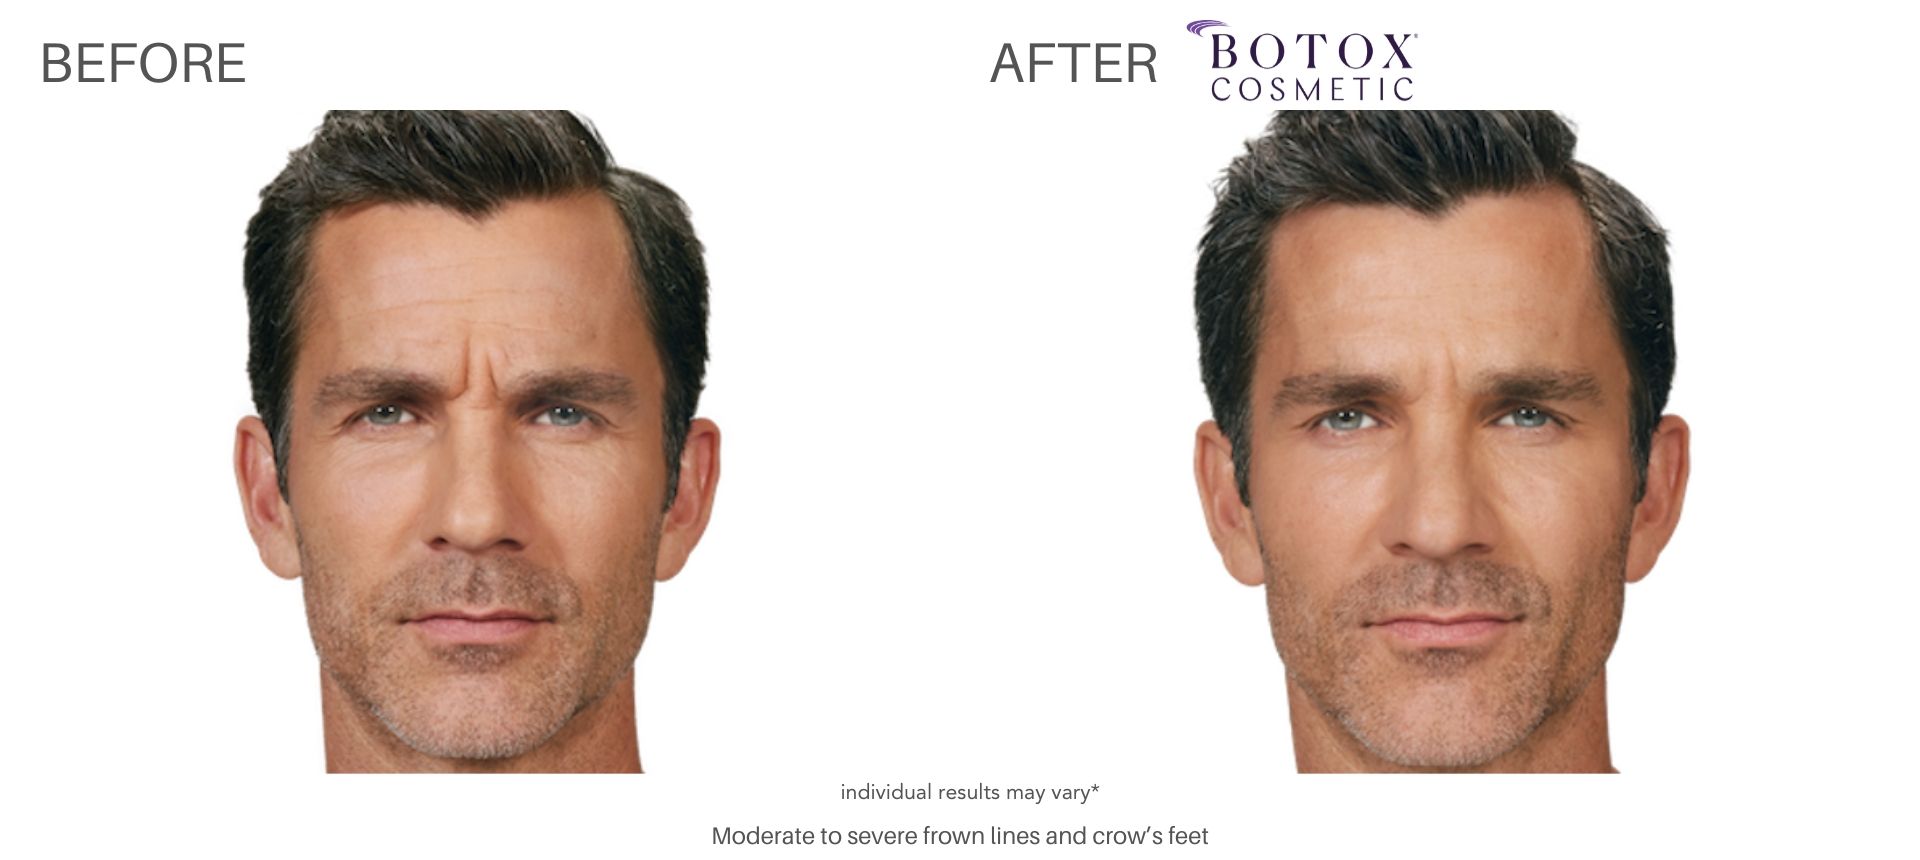 Man's botox cosmetics before and after treatment to forehead at Laser + Skin Institute in Chatham, NJ.